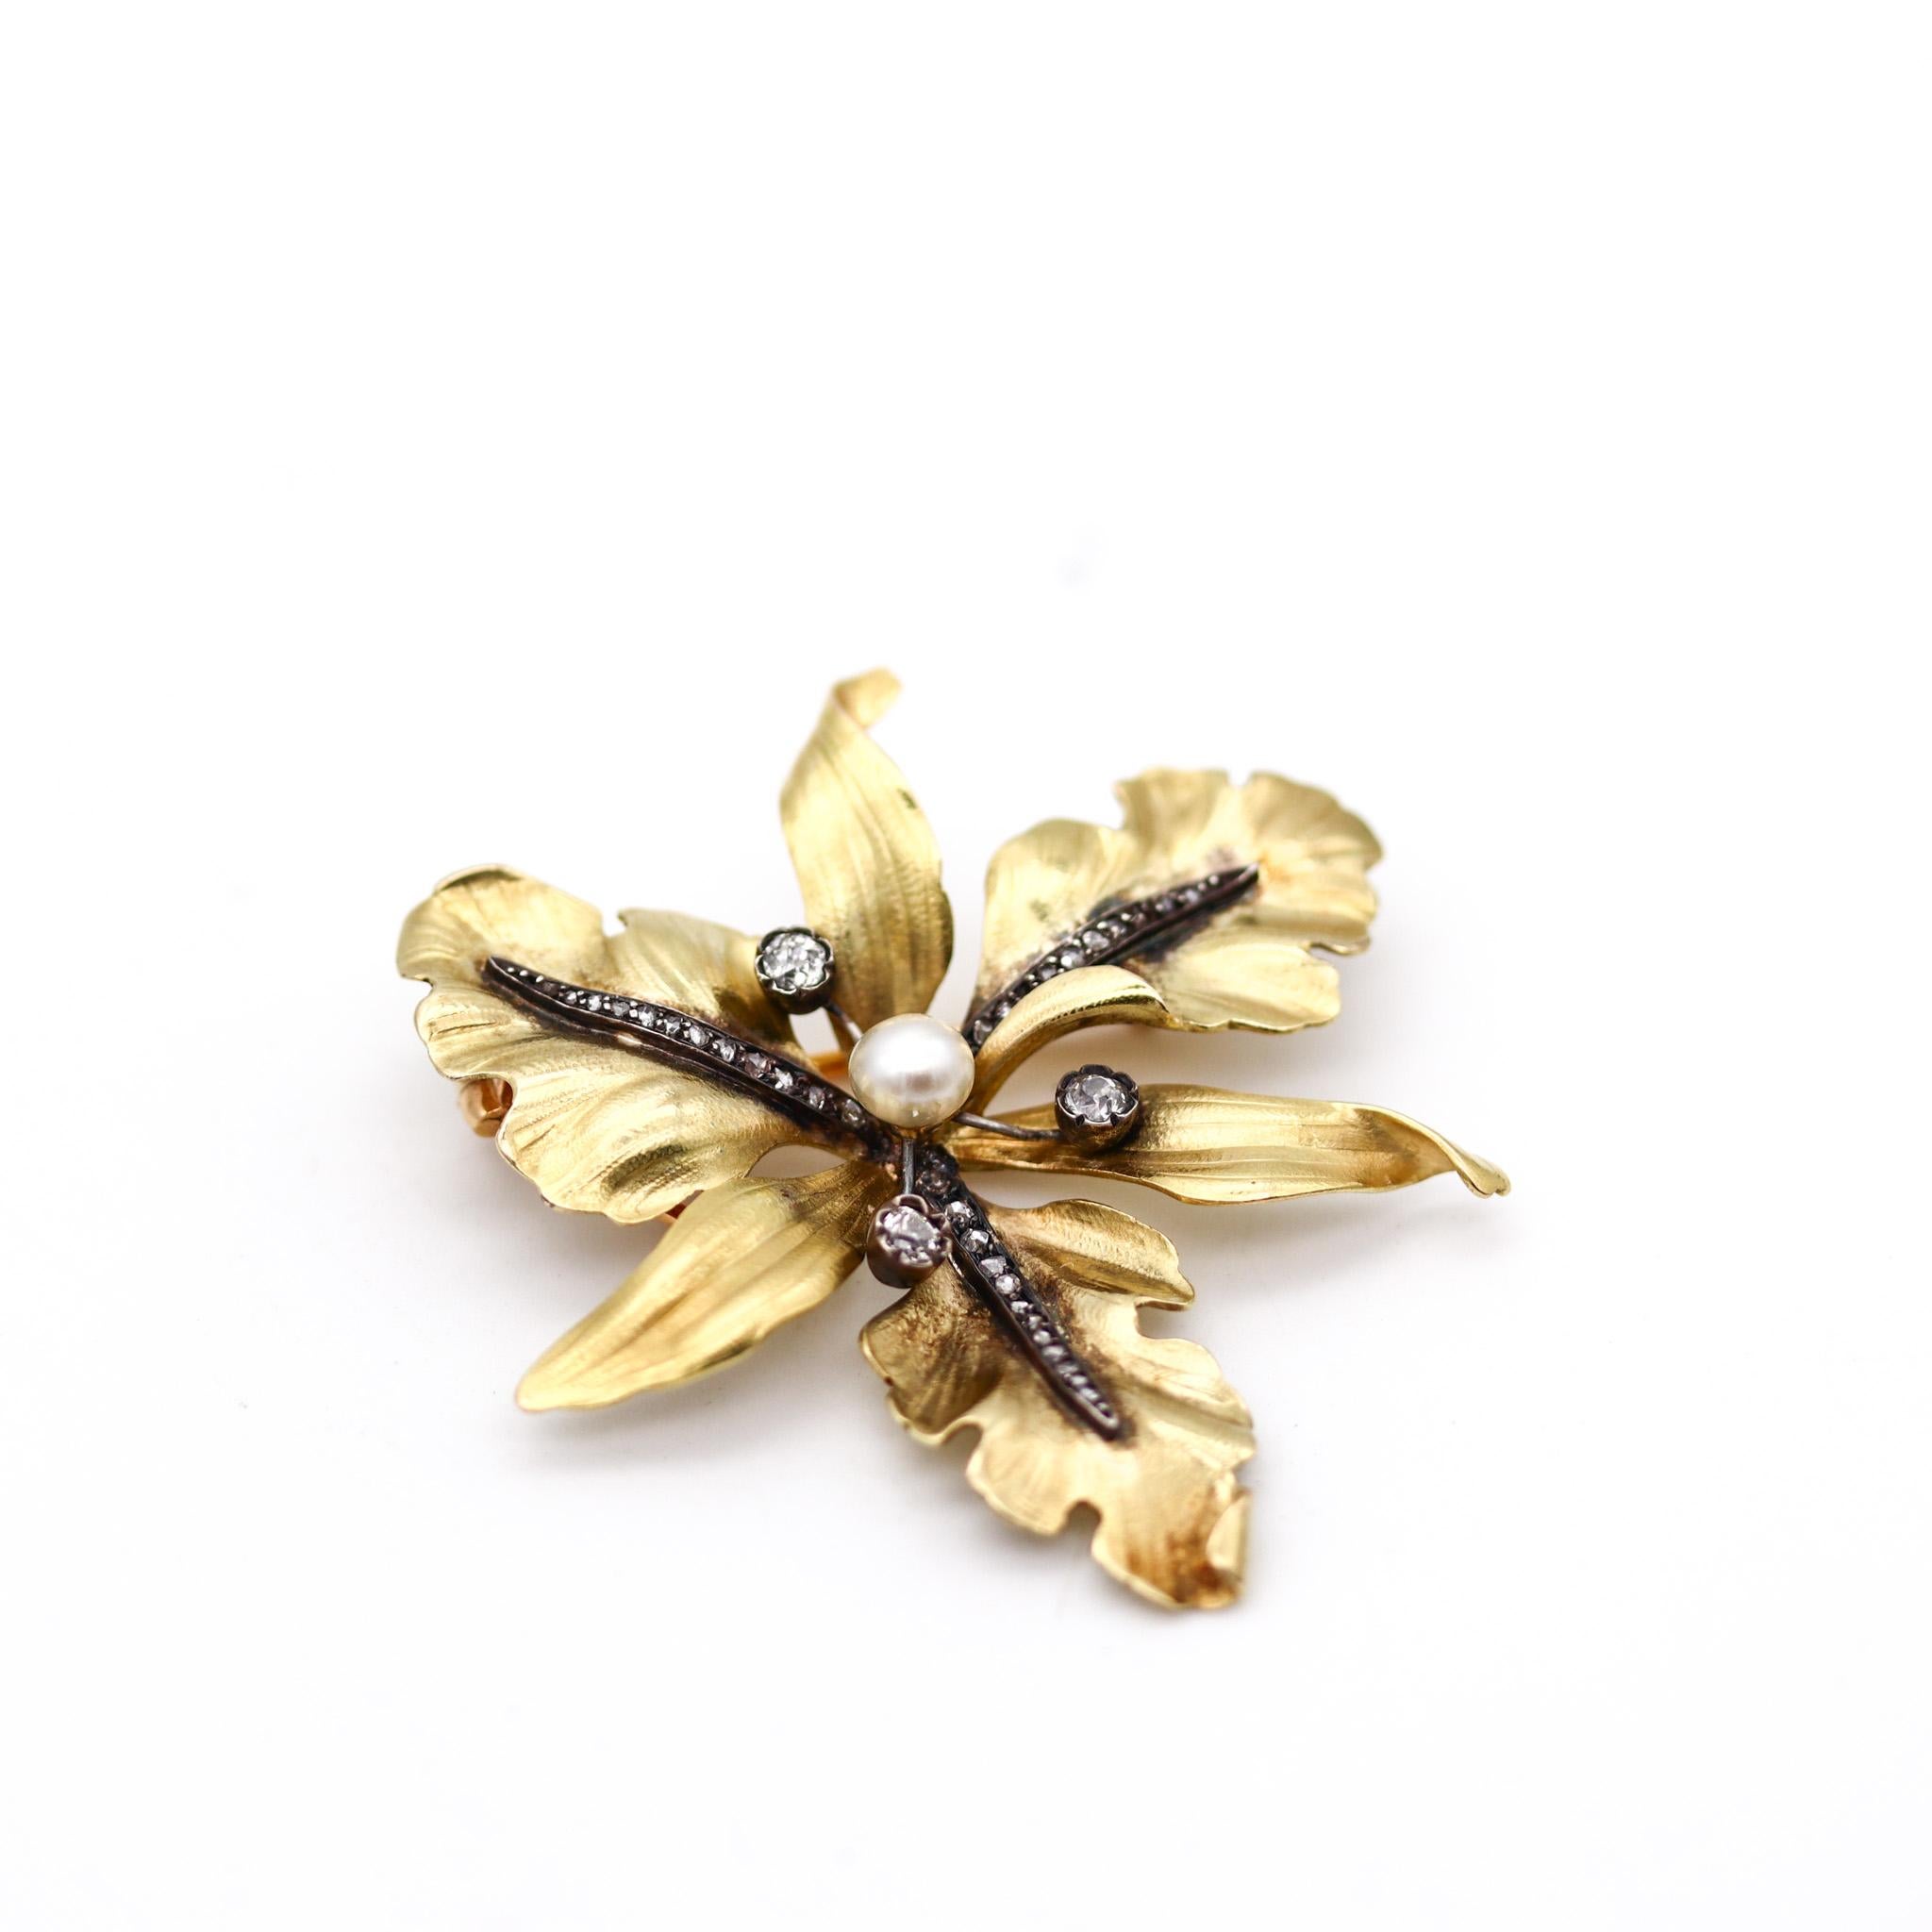 French art nouveau orchid pendant-brooch.

Beautiful piece of jewelry from the art nouveau period, created in France back in the turn of the 19th century, circa 1900. Crafted in the shape of a six-petals orchid in solid yellow gold of 18 karats with